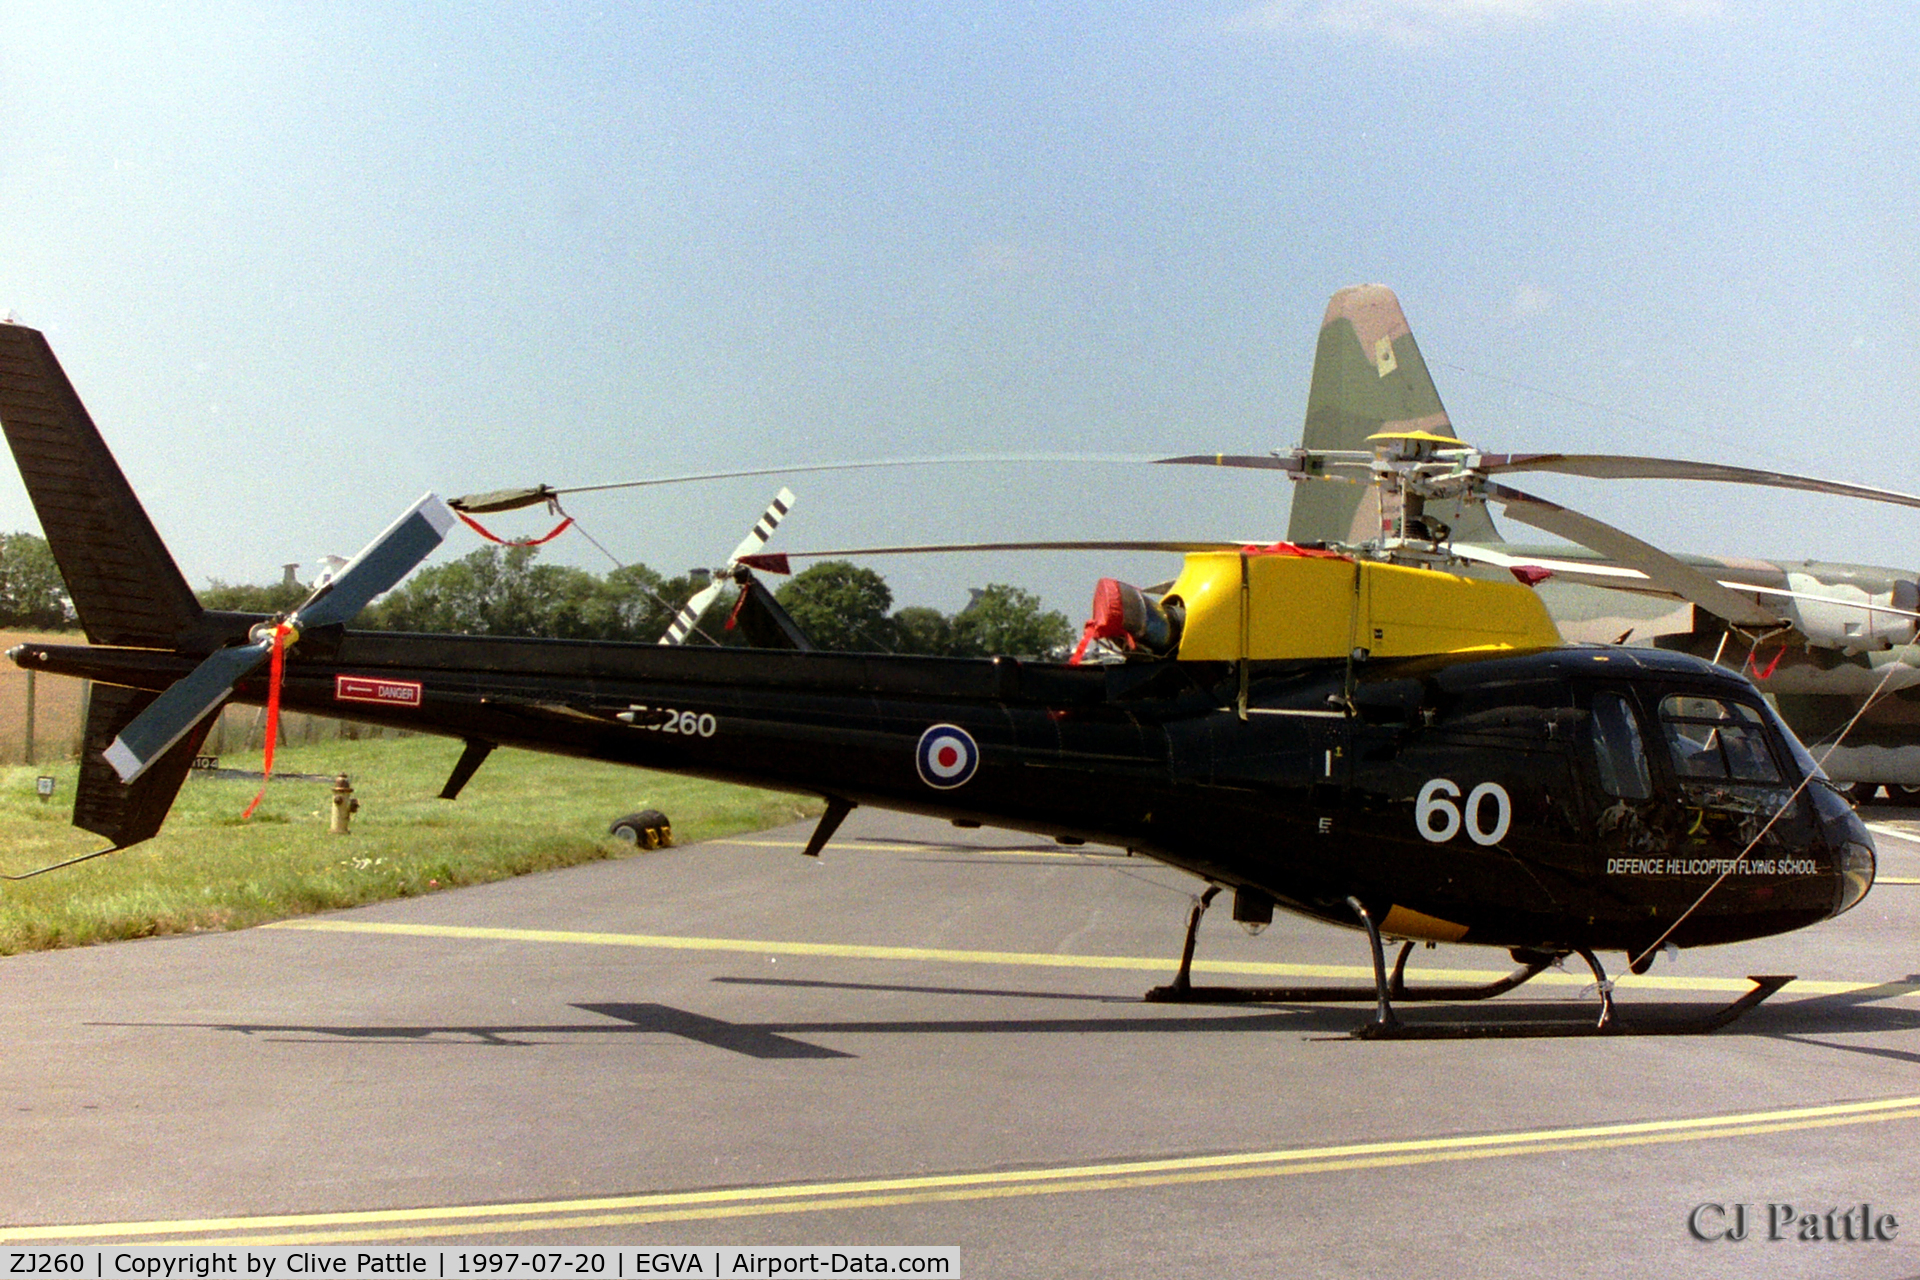 ZJ260, 1997 Eurocopter AS-350BB Squirrel HT1 Ecureuil C/N 2985, On display at RIAT '97 at RAF Fairford EGVA whilst coded '60' with 660 Sqn Army Air Corps/DHFS